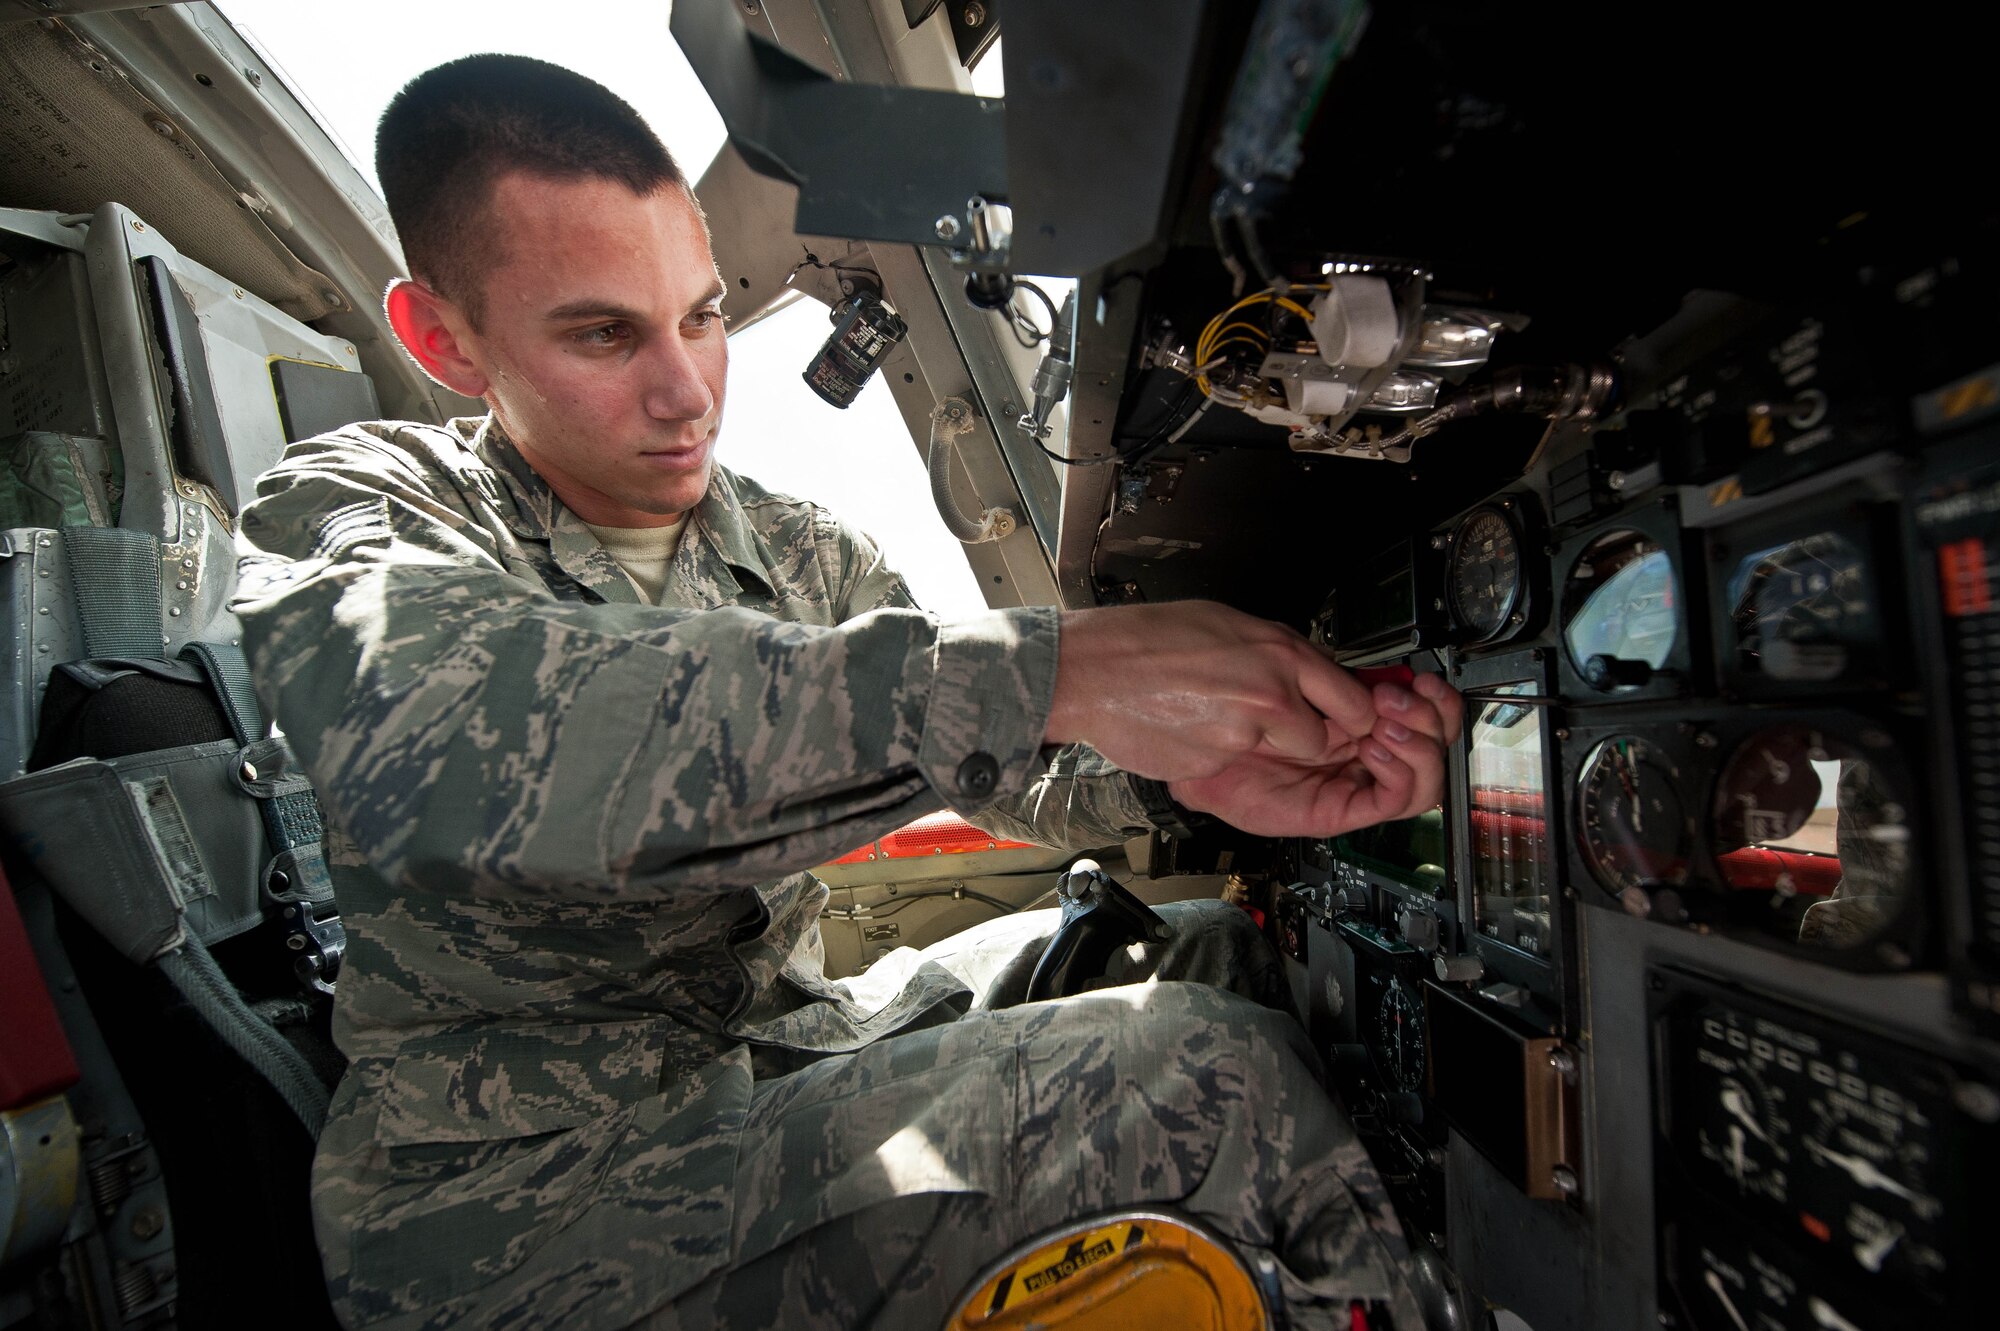 Senior Airman Cody Candrea, 28th Aircraft Maintenance Squadron instrument flight controls technician, adjusts the self contained attitude indicator systems in a B-1 cockpit during routine maintenance at Ellsworth Air Force Base, S.D., May 15, 2013. Instrument flight control technicians specialize in electronics and avionics, and maintain and repair everything from radar and communications systems to flight controls and weapon systems. (U.S. Air Force photo by Airman 1st Class Zachary Hada/Released)